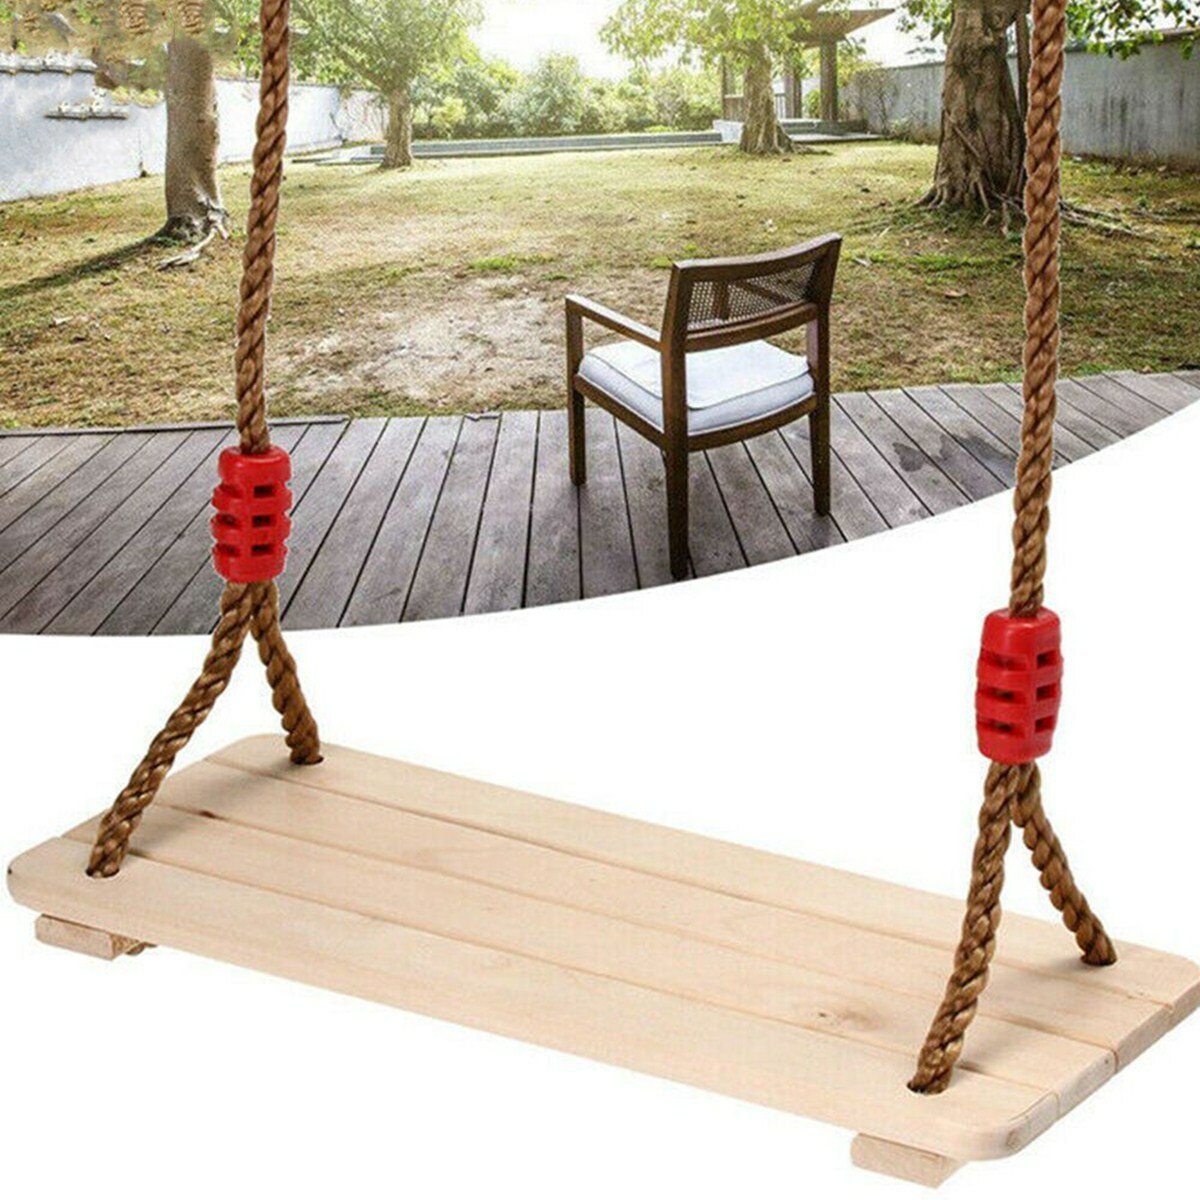 Outdoor Wooden Swing Seat Hanging Chair Porch Swing Camping Garden Patio Sale Banggood Com